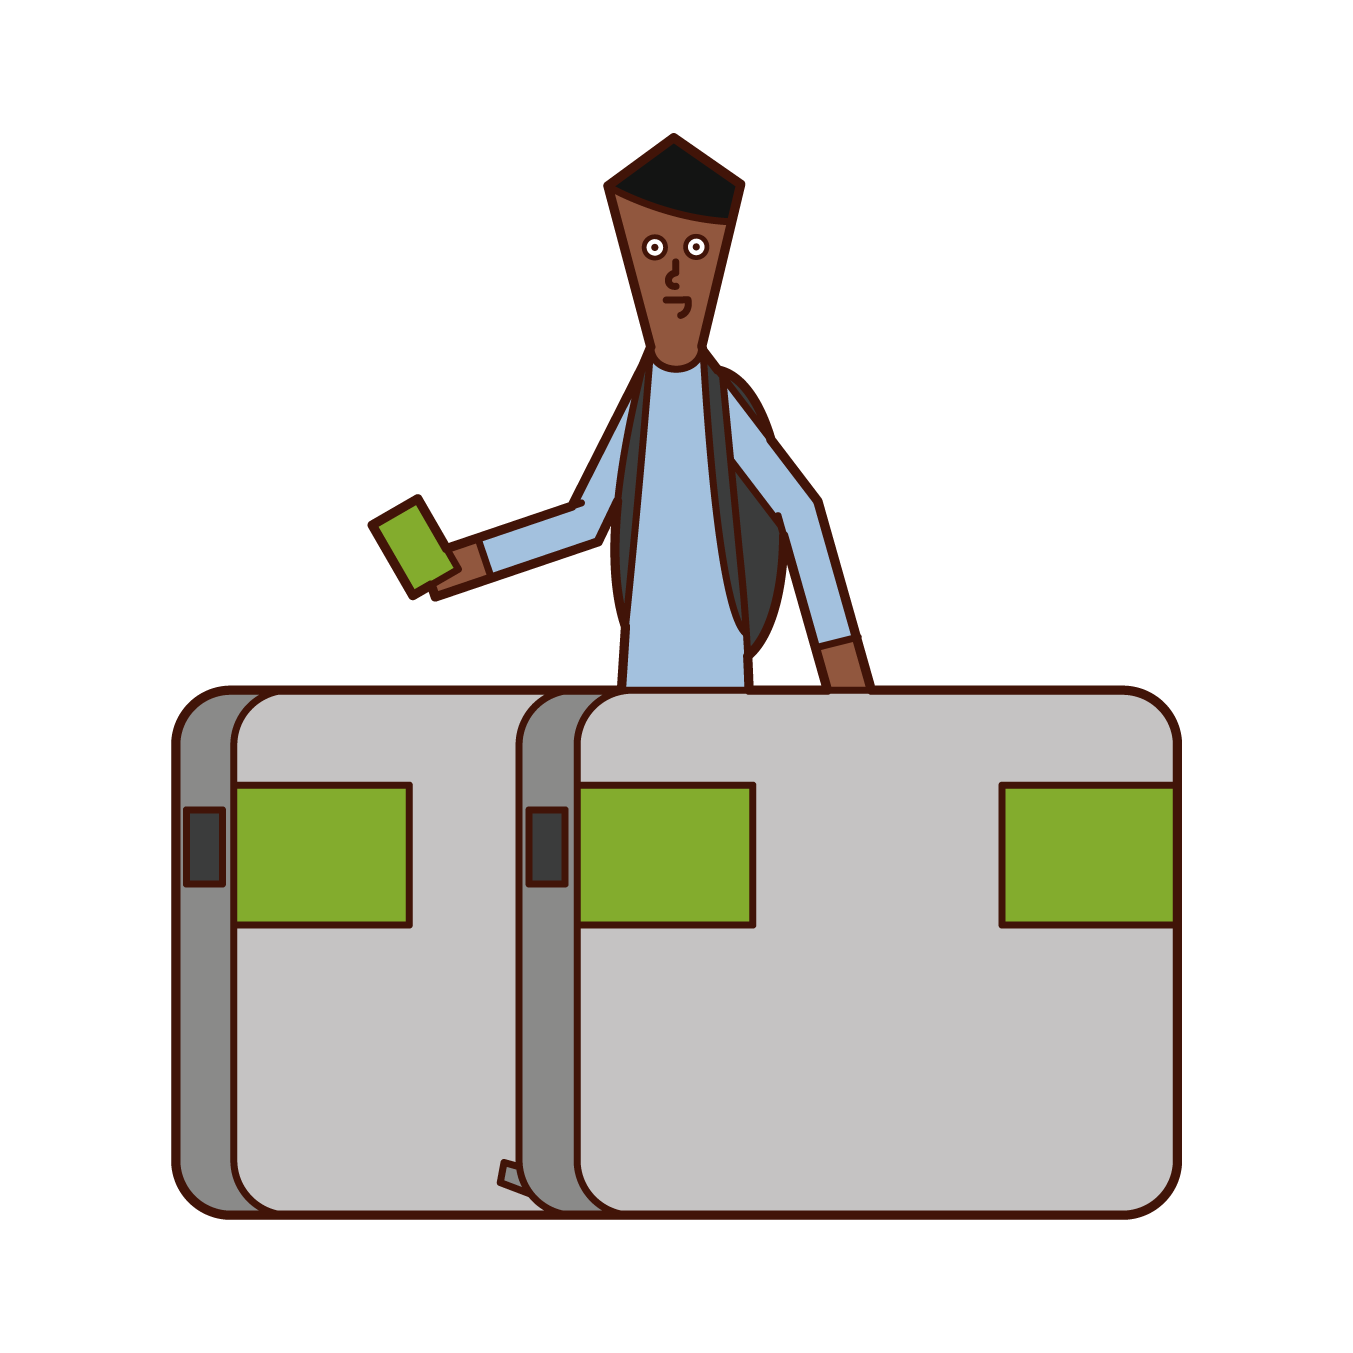 Illustration of a man passing through the ticket gate of a station